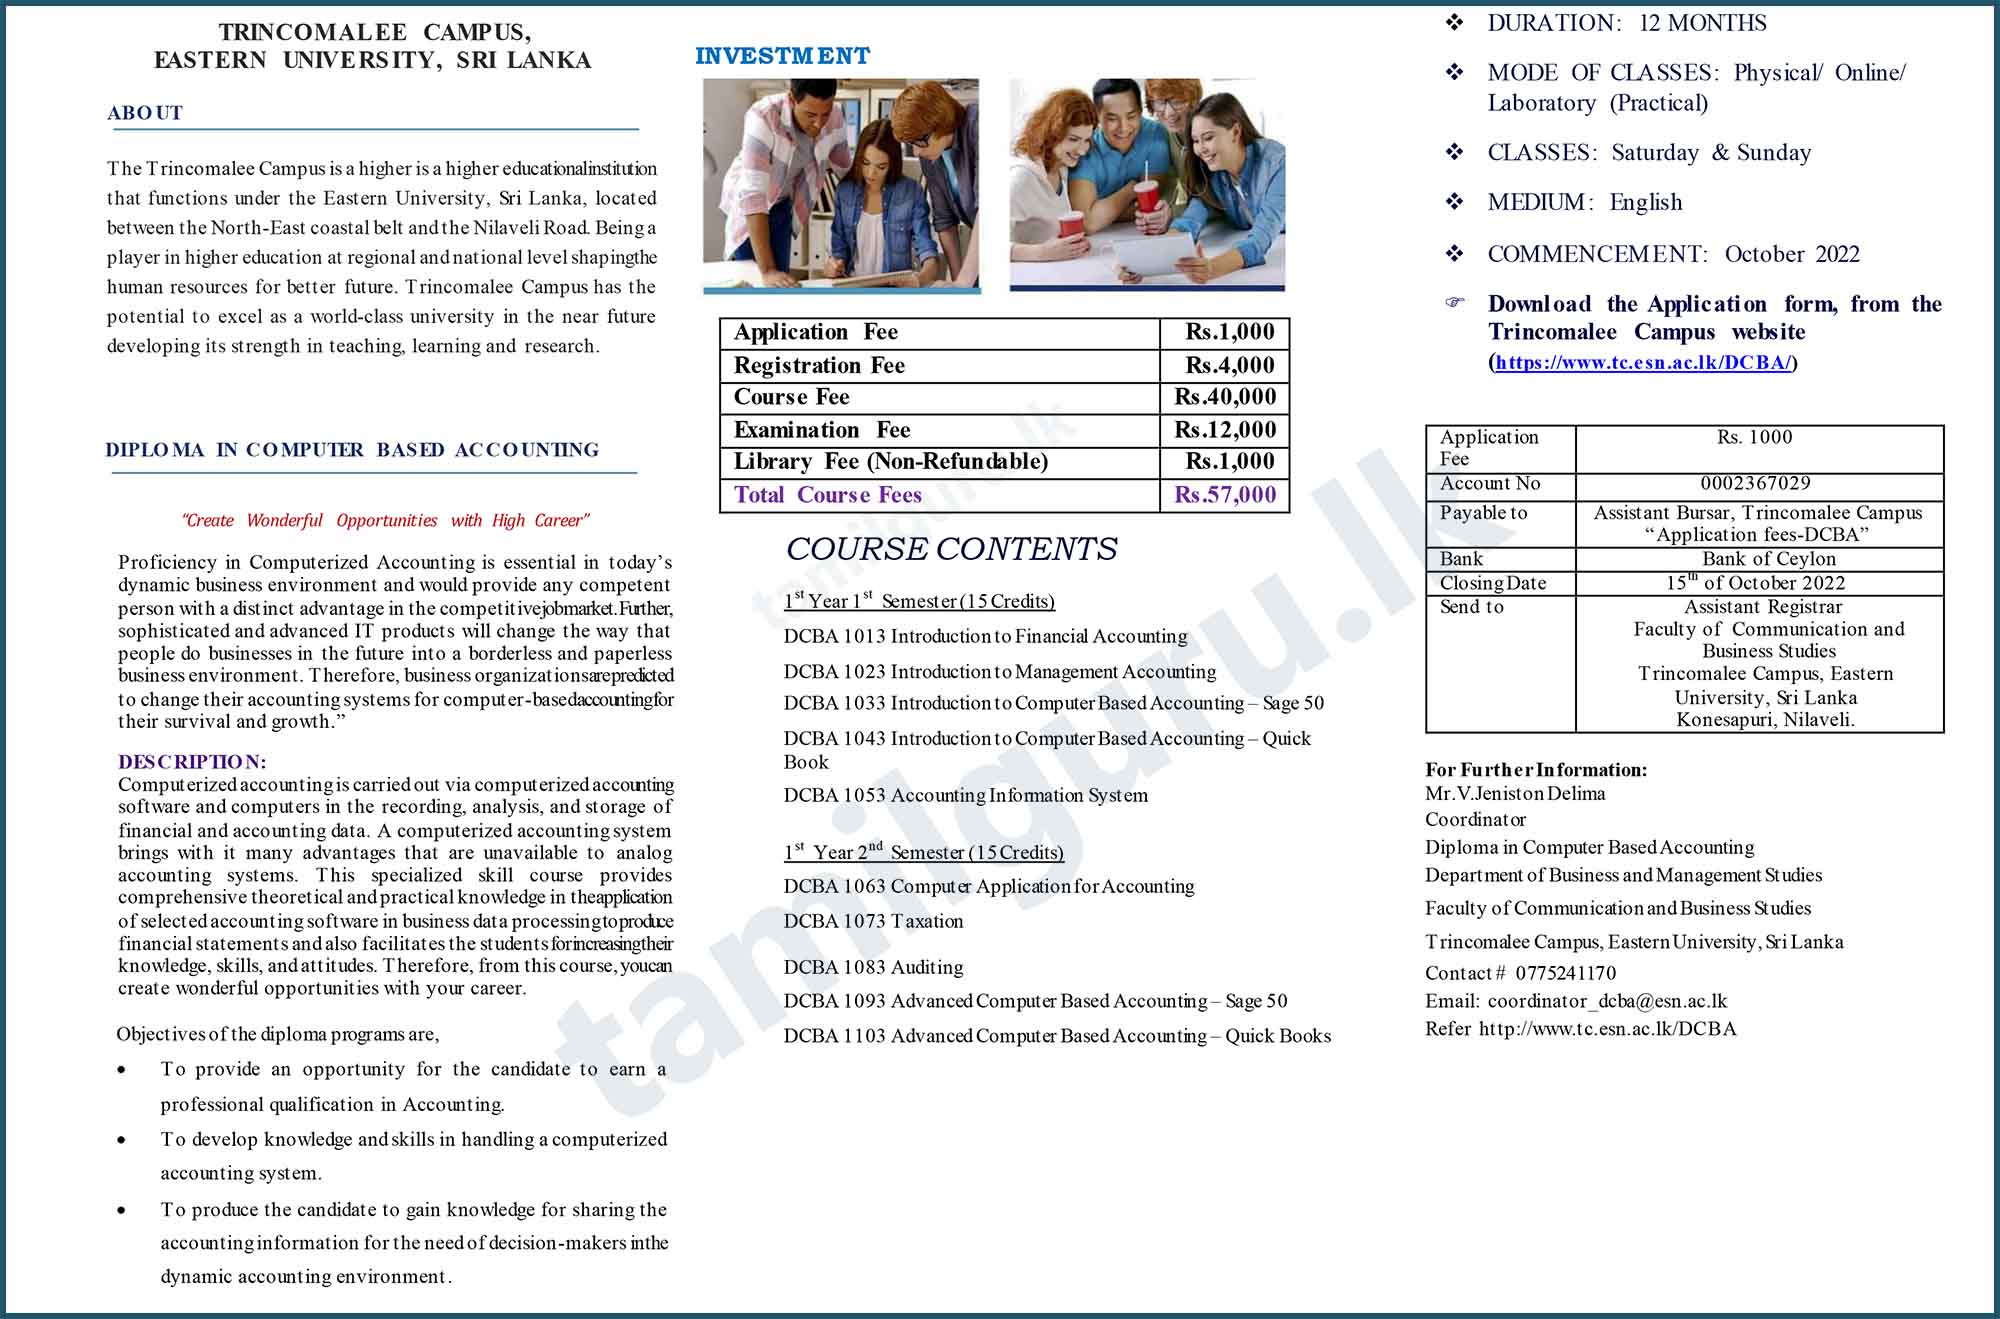 More Details - Diploma in Computer Based Accounting (DCBA) 2022 - Trincomalee Campus, Eastern University, Sri Lanka (EUSL)